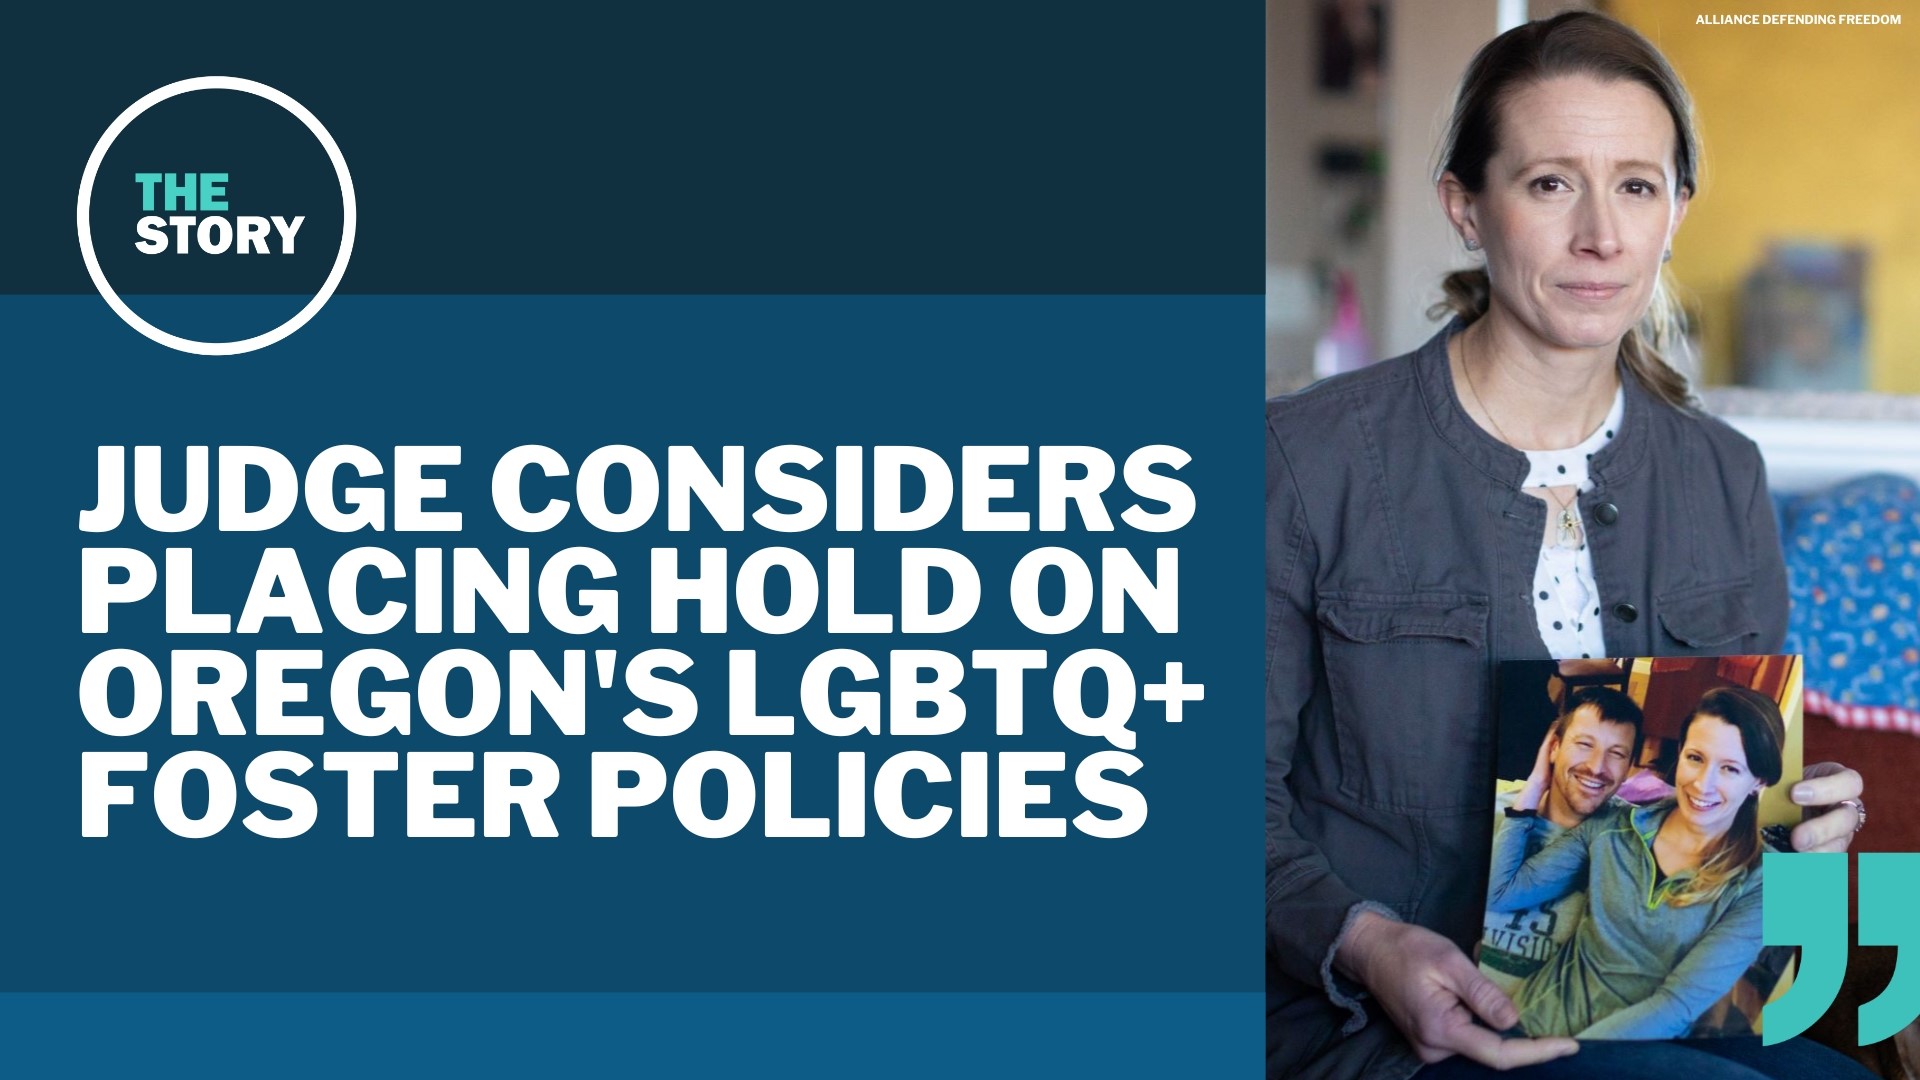 Jessica Bates, a single mother of five biological children, refused to agree that she'd support foster kids with LGBTQ+ identities, part of Oregon's requirements.